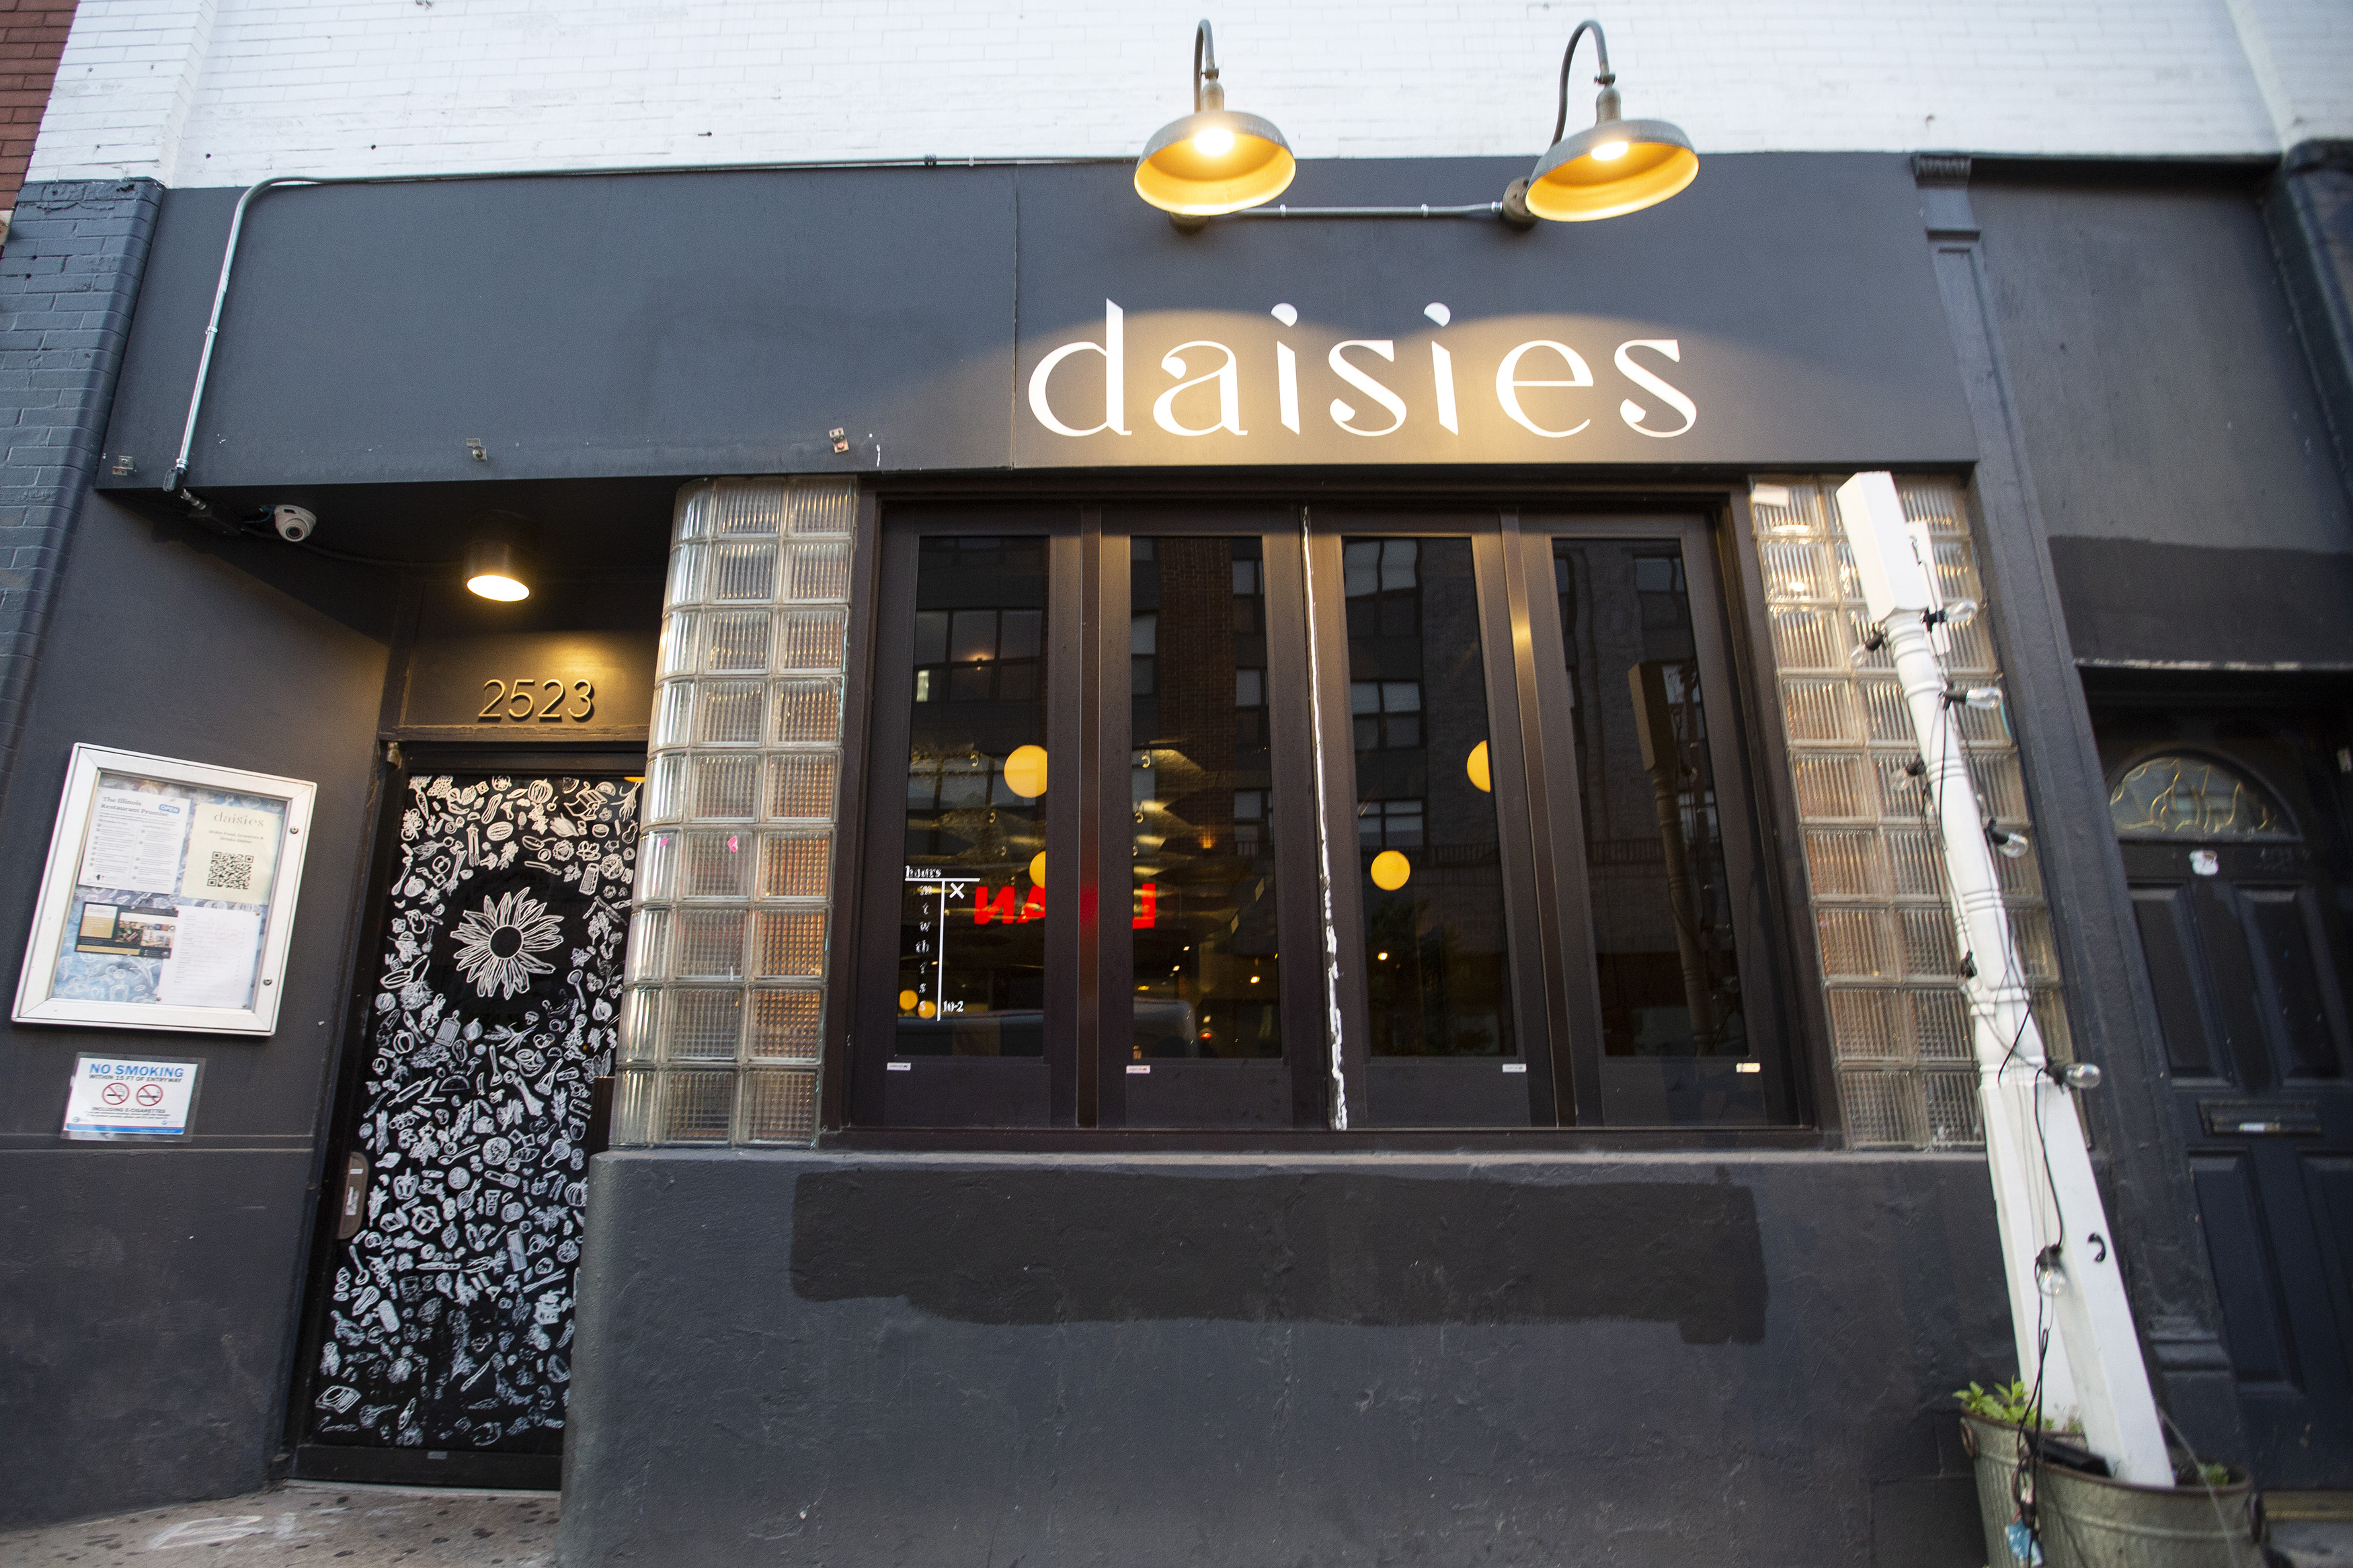 A storefront restaurant with a sign that reads “Daisies.”